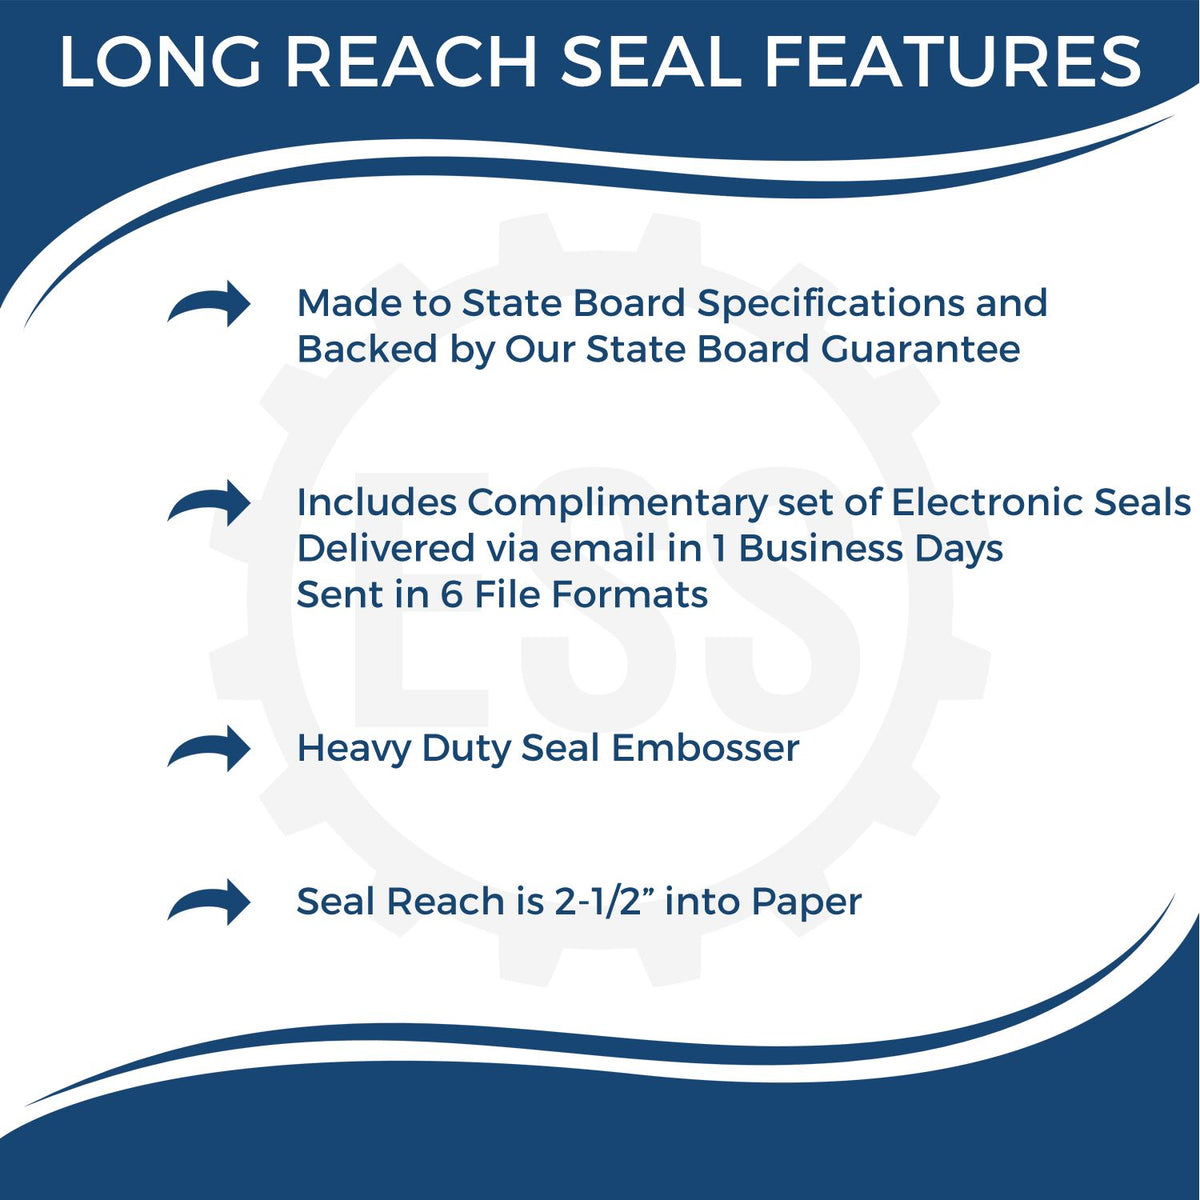 A picture of an infographic highlighting the selling points for the Long Reach Indiana Land Surveyor Seal